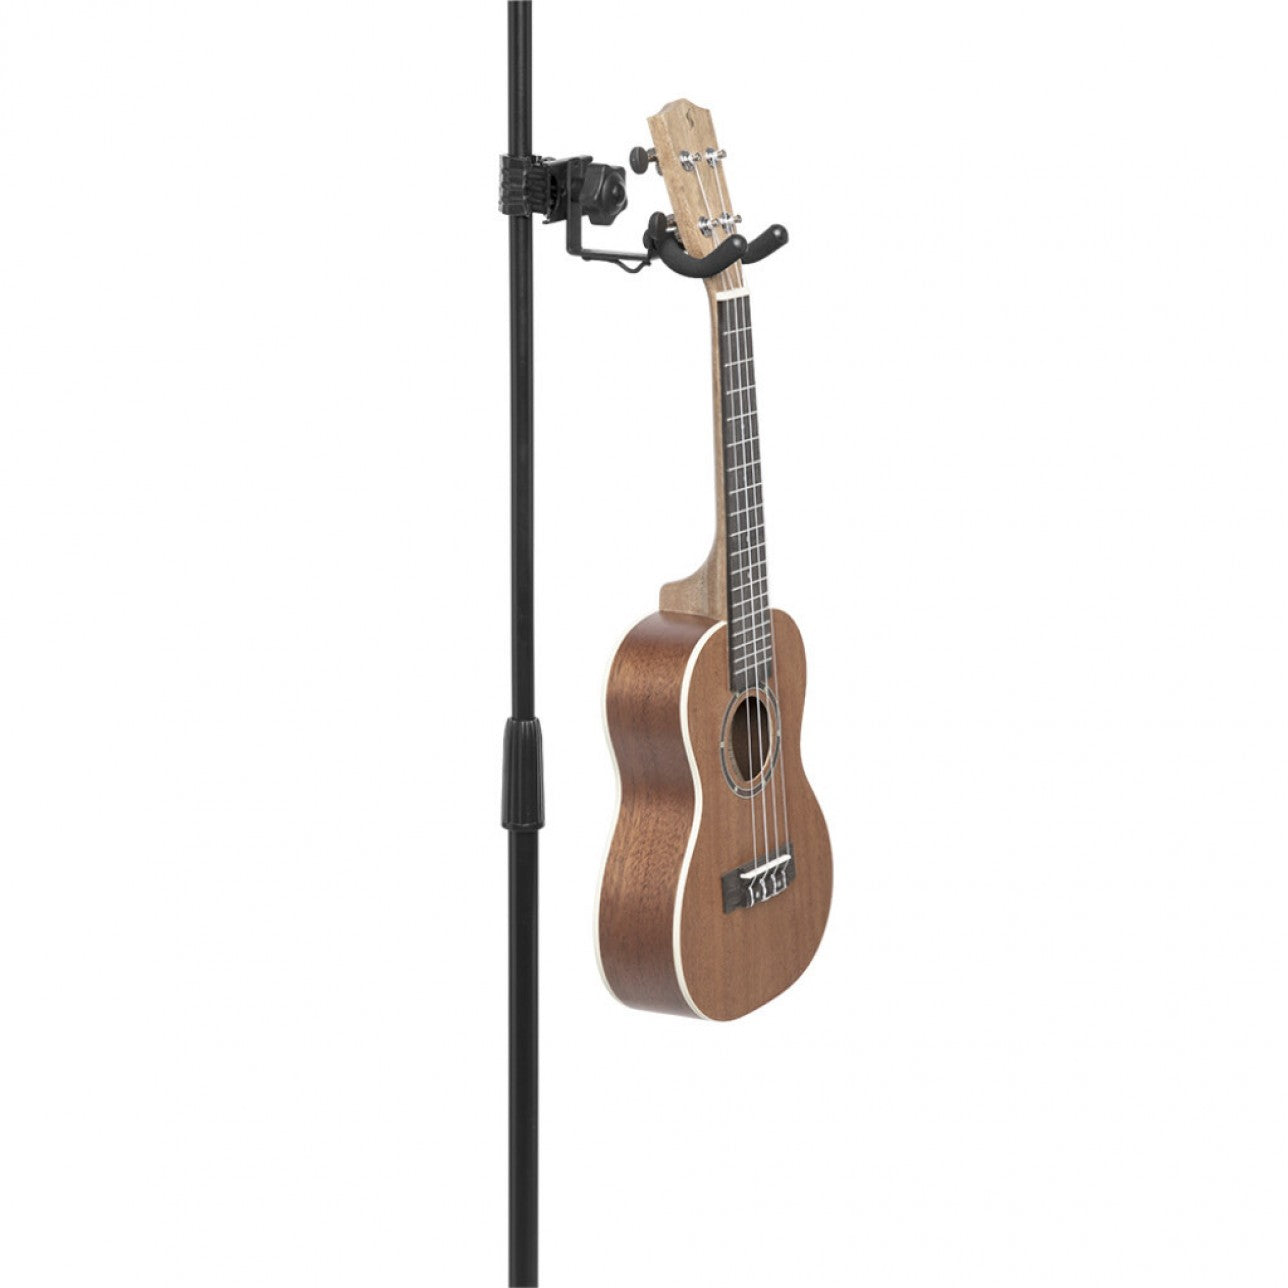 SCL-VH Ukulele Holder clamps to your Music stand or Mic stand Material: Metal (structure), rubber (anti-skid clamp)  Fixing: On any 18-mm to 45-mm-diameter tube attachable to any cymbal, microphone or music stand Reinforced screw-in clamping system.